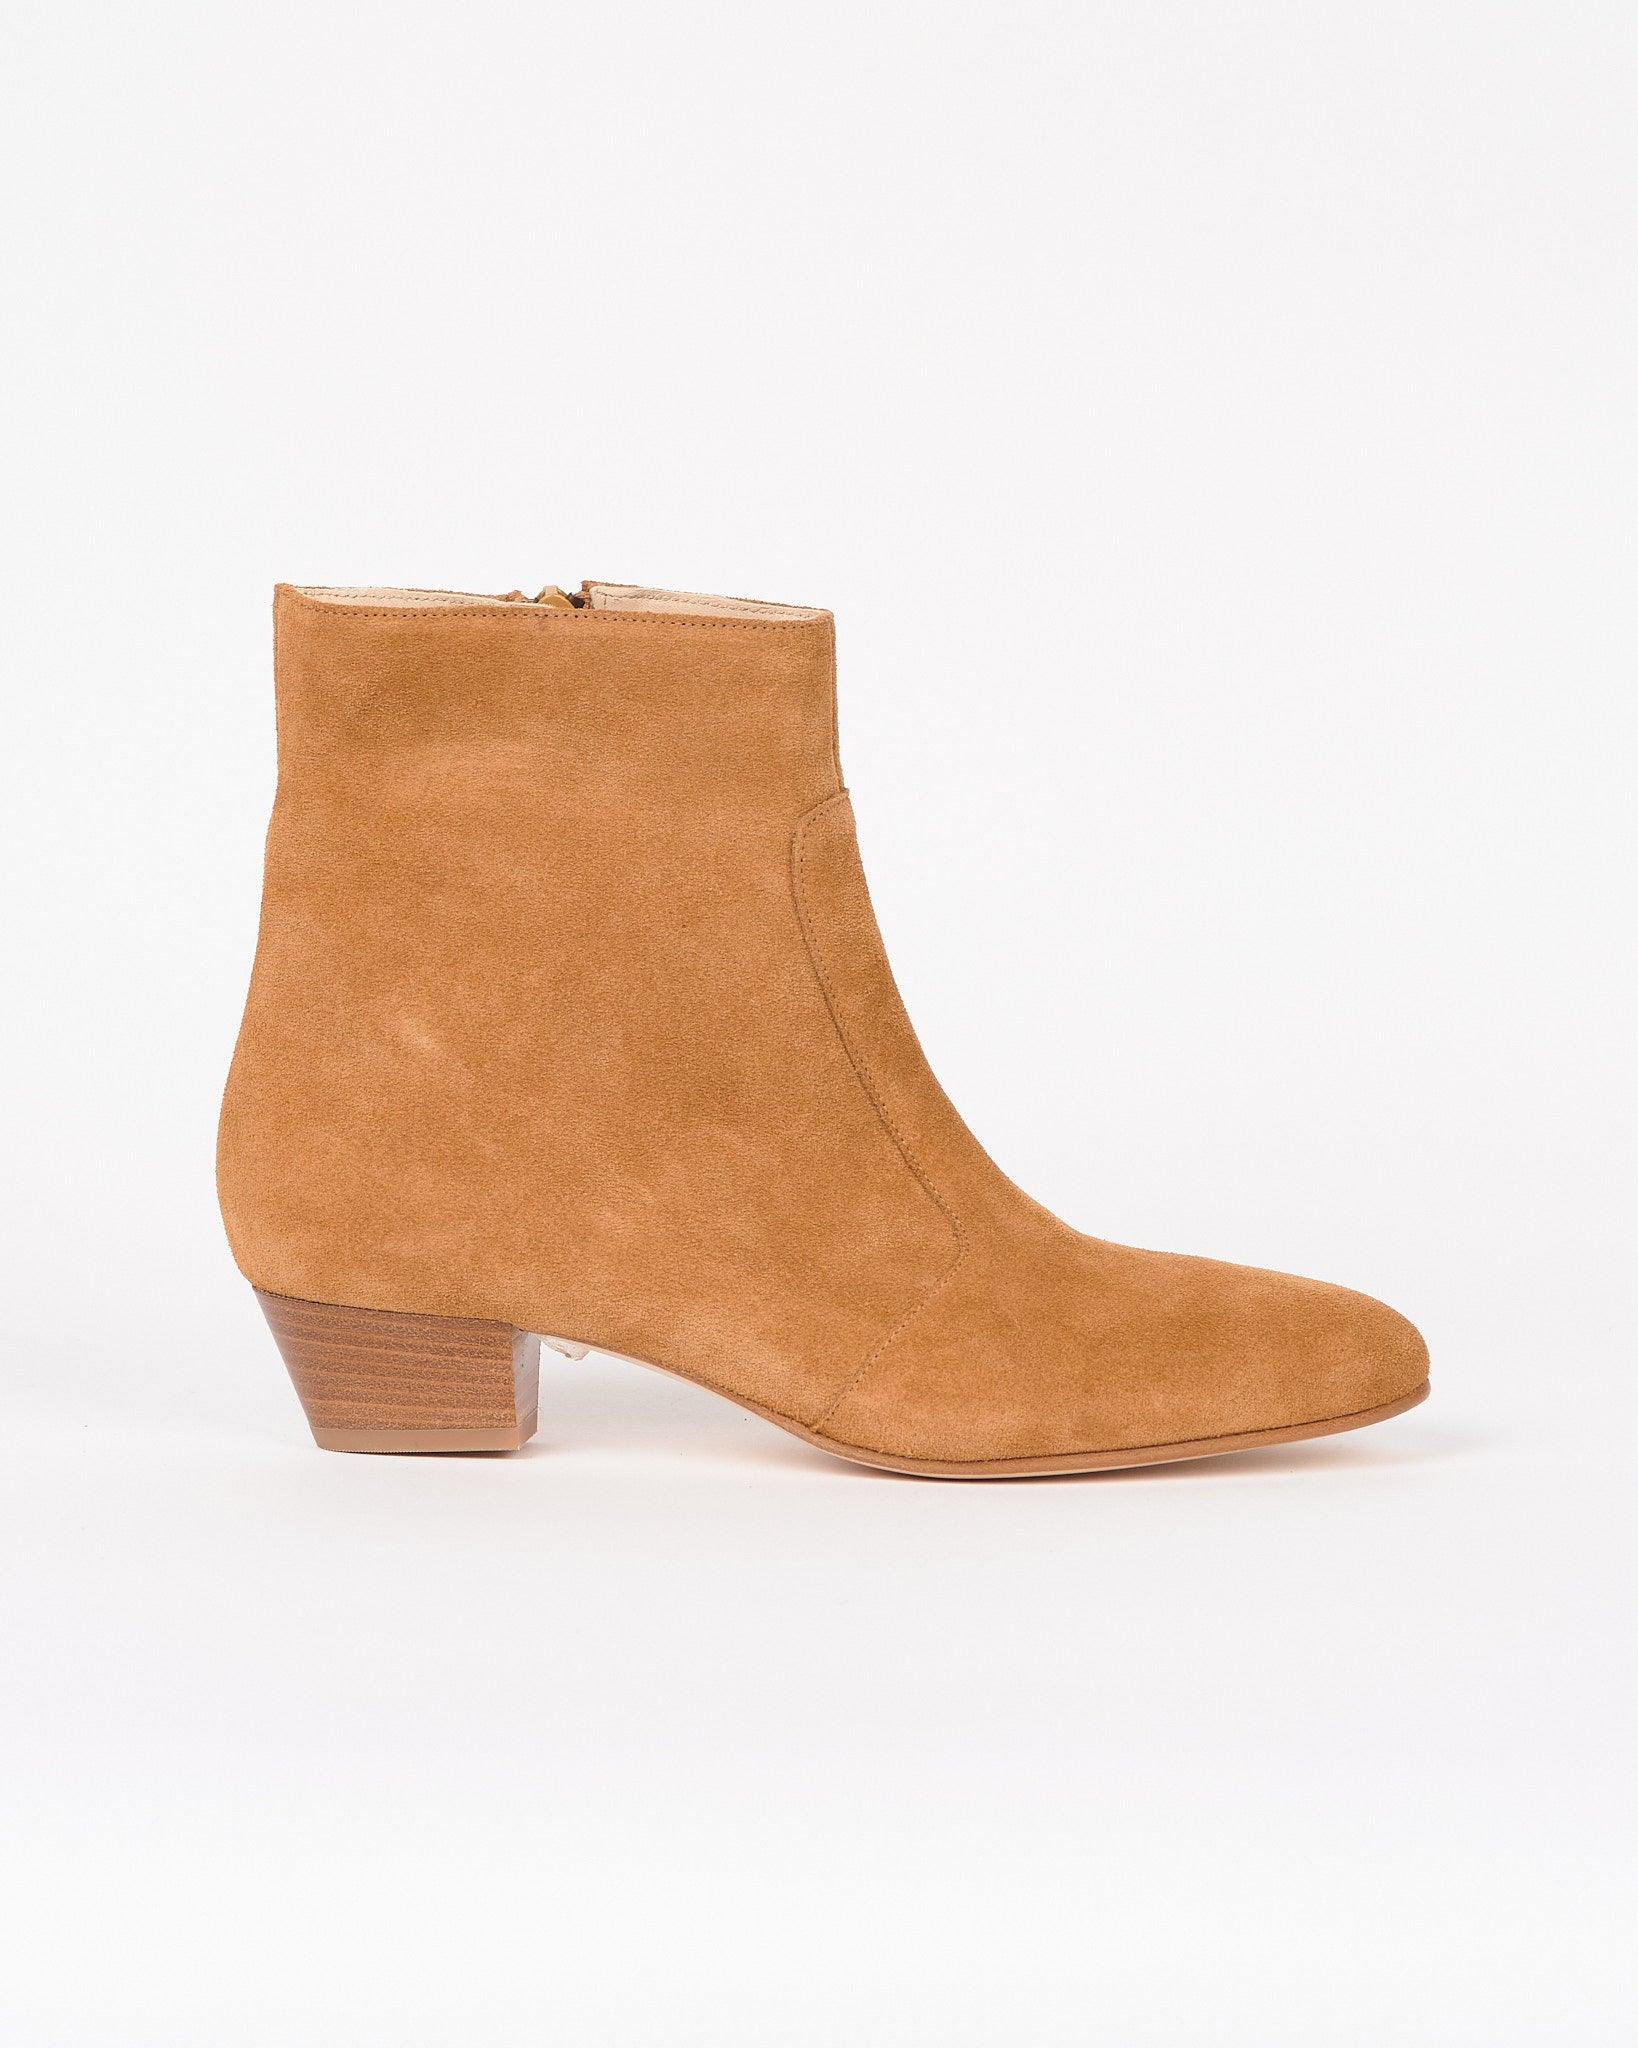 The Beatnik in Camel Suede Side View Outside